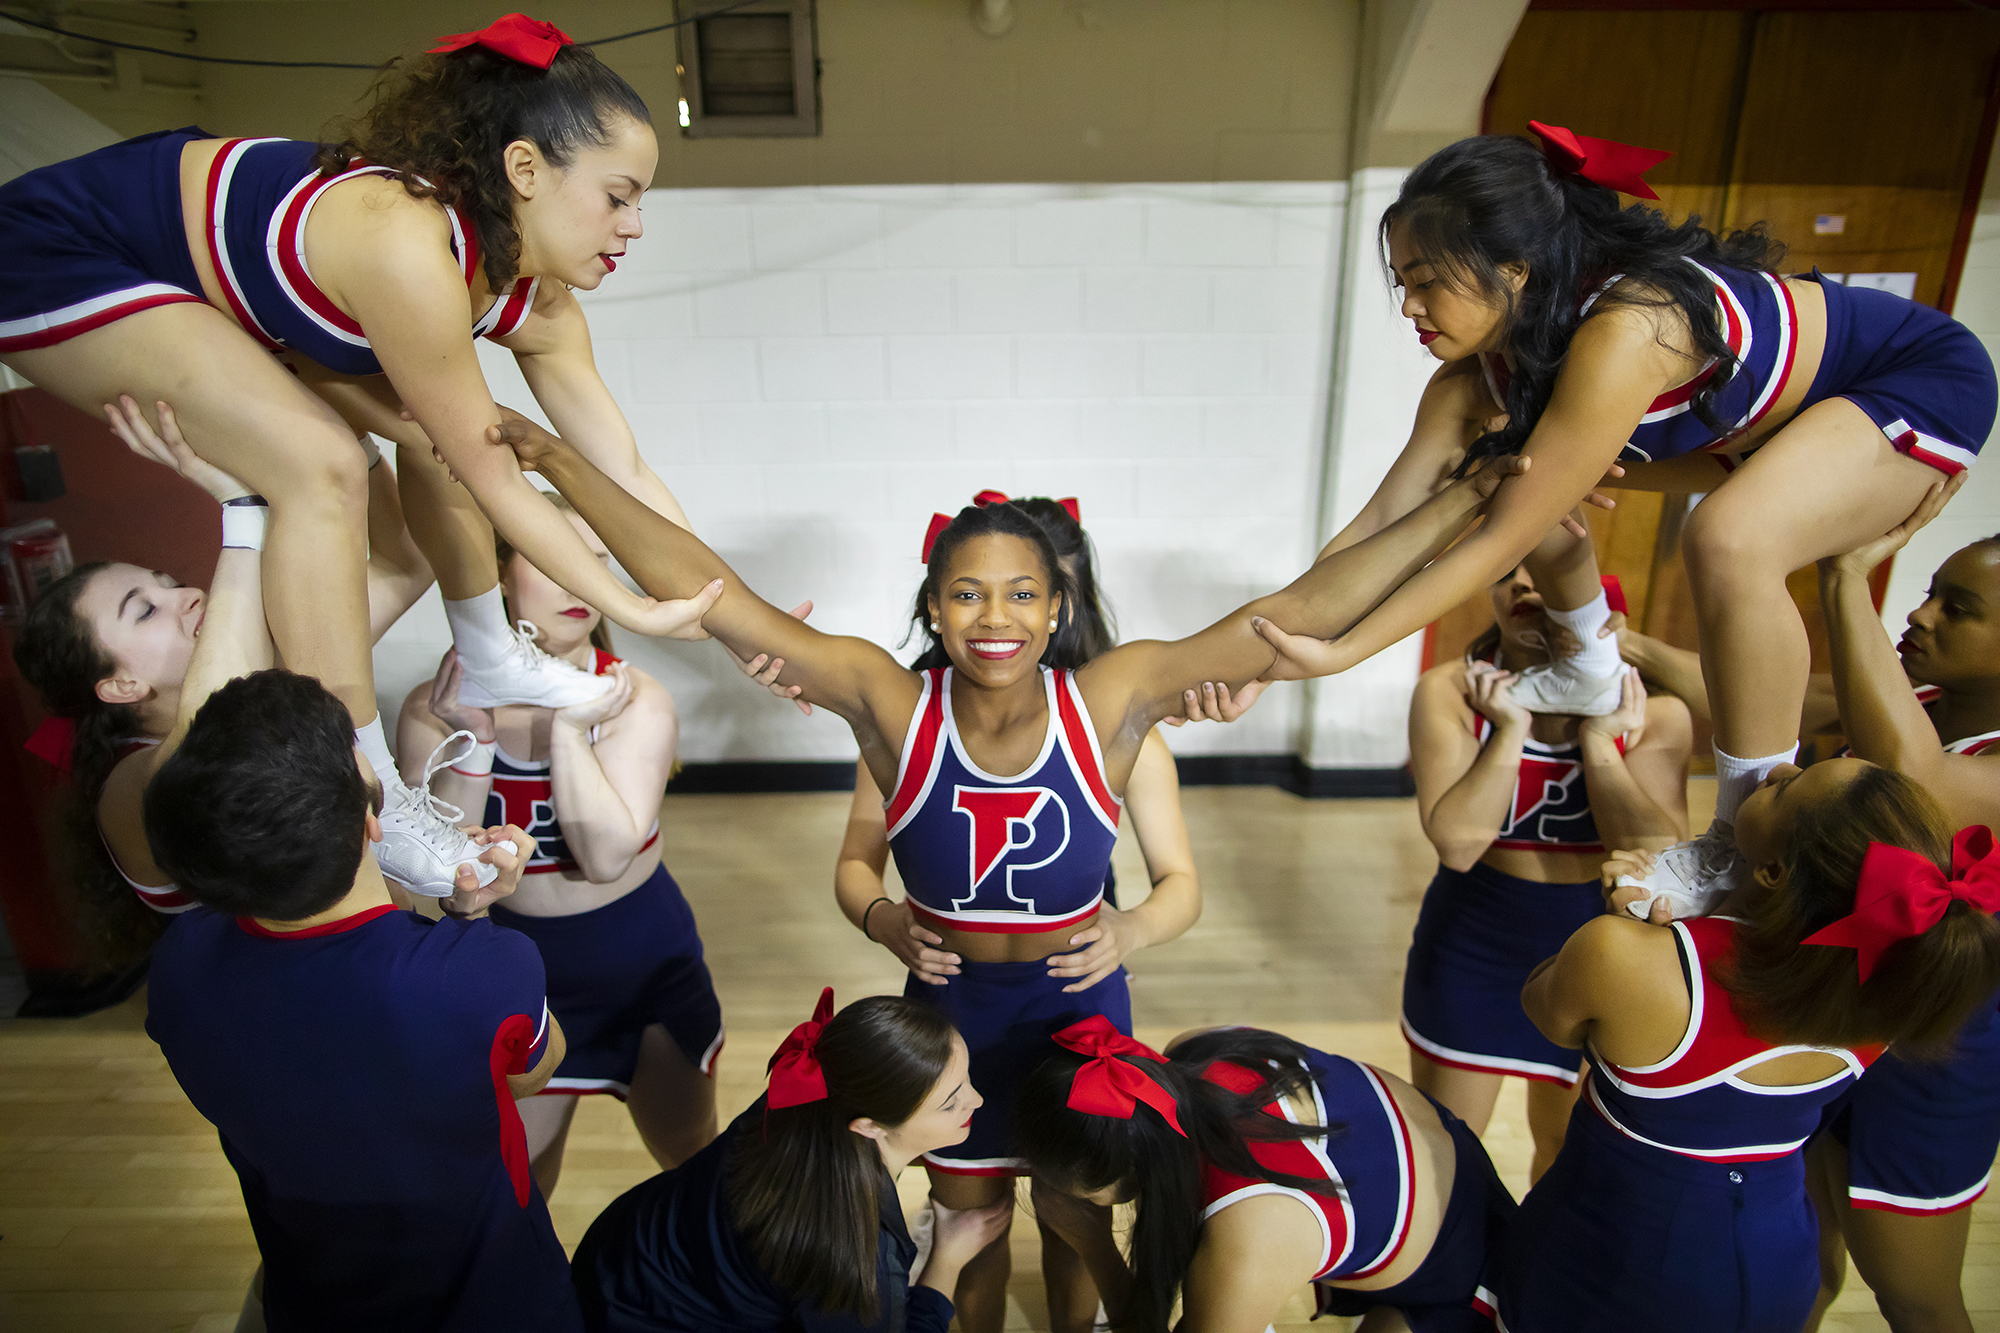 Maya Moore is lifted up by Penn cheerleaders for a cheer at a Penn basketball game.